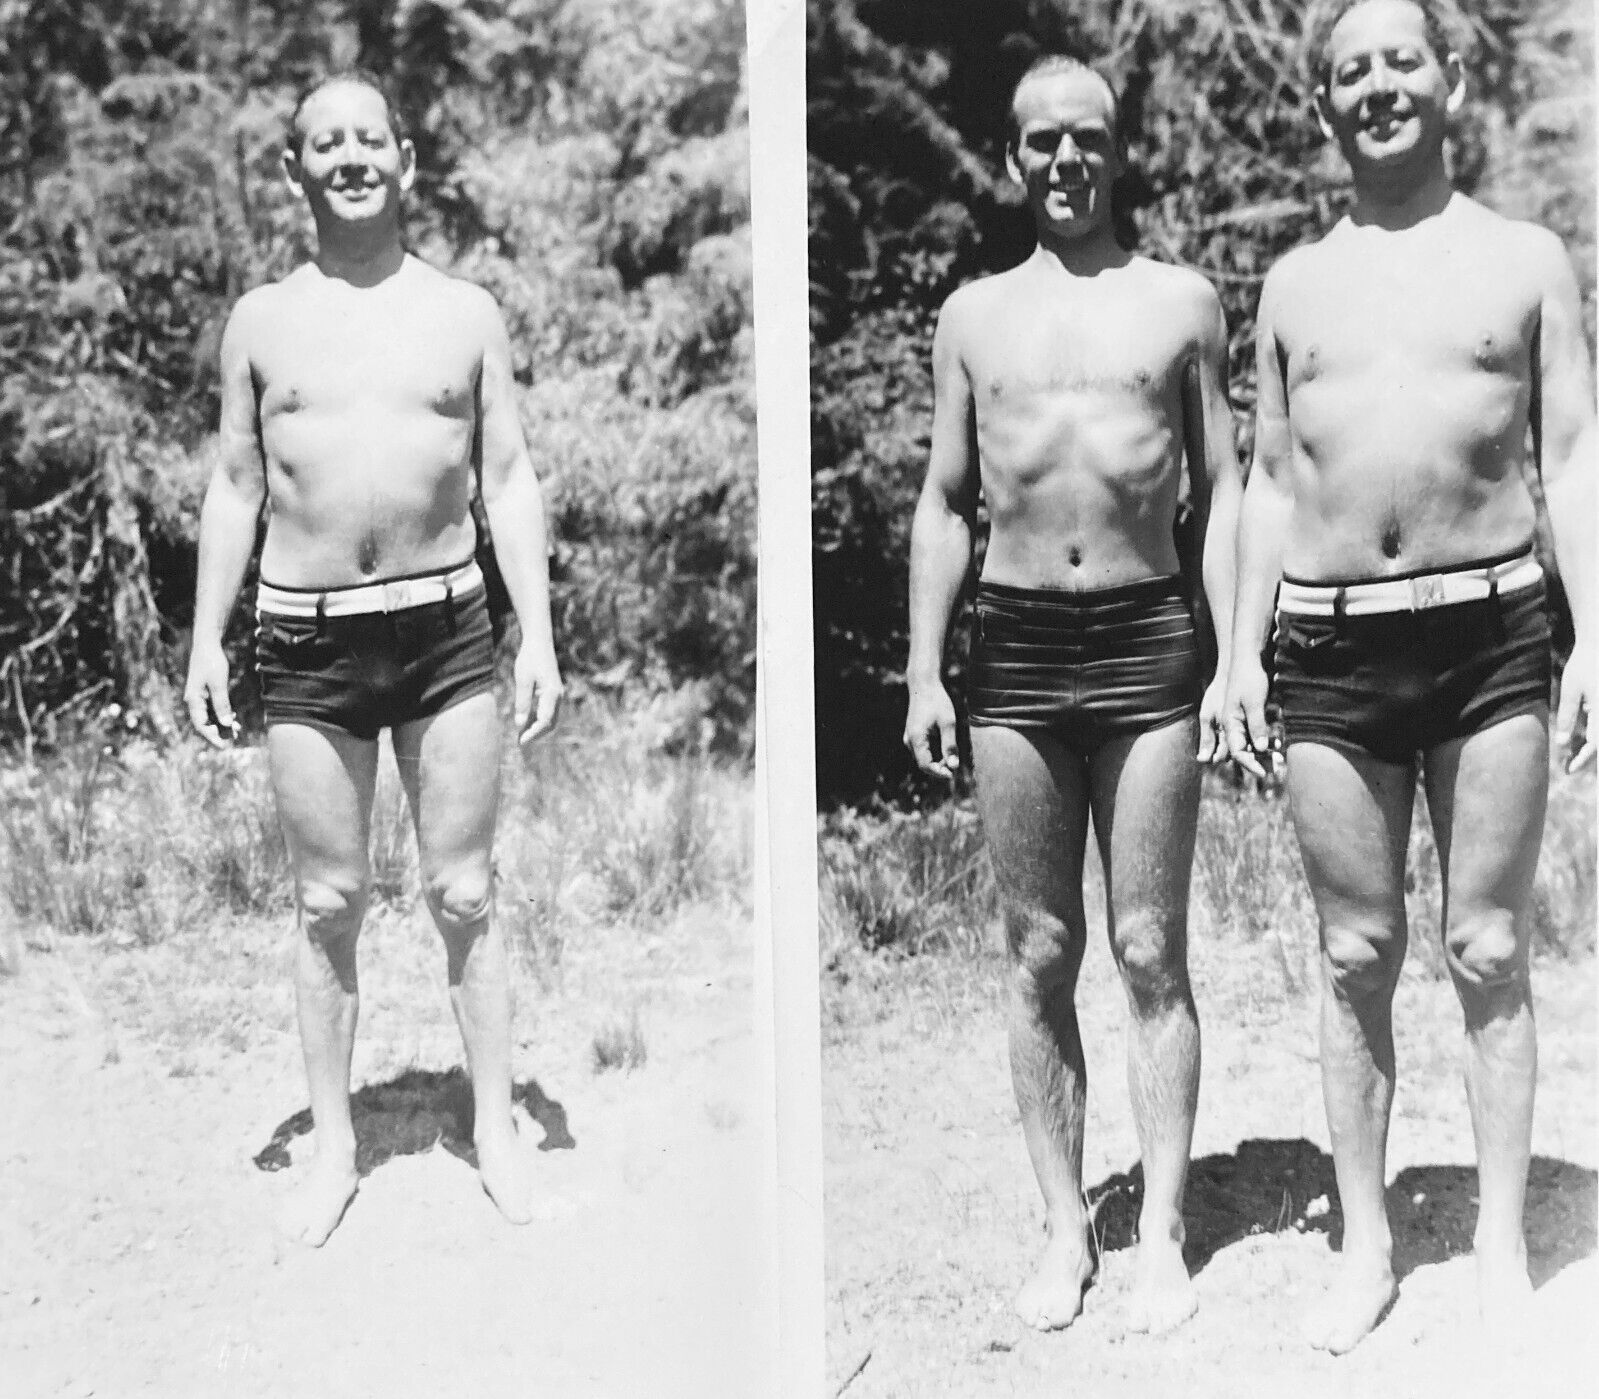 Lot of 2 Vintage Photos Two Shirtless Men Bathing Suit Trunks Gay Interest